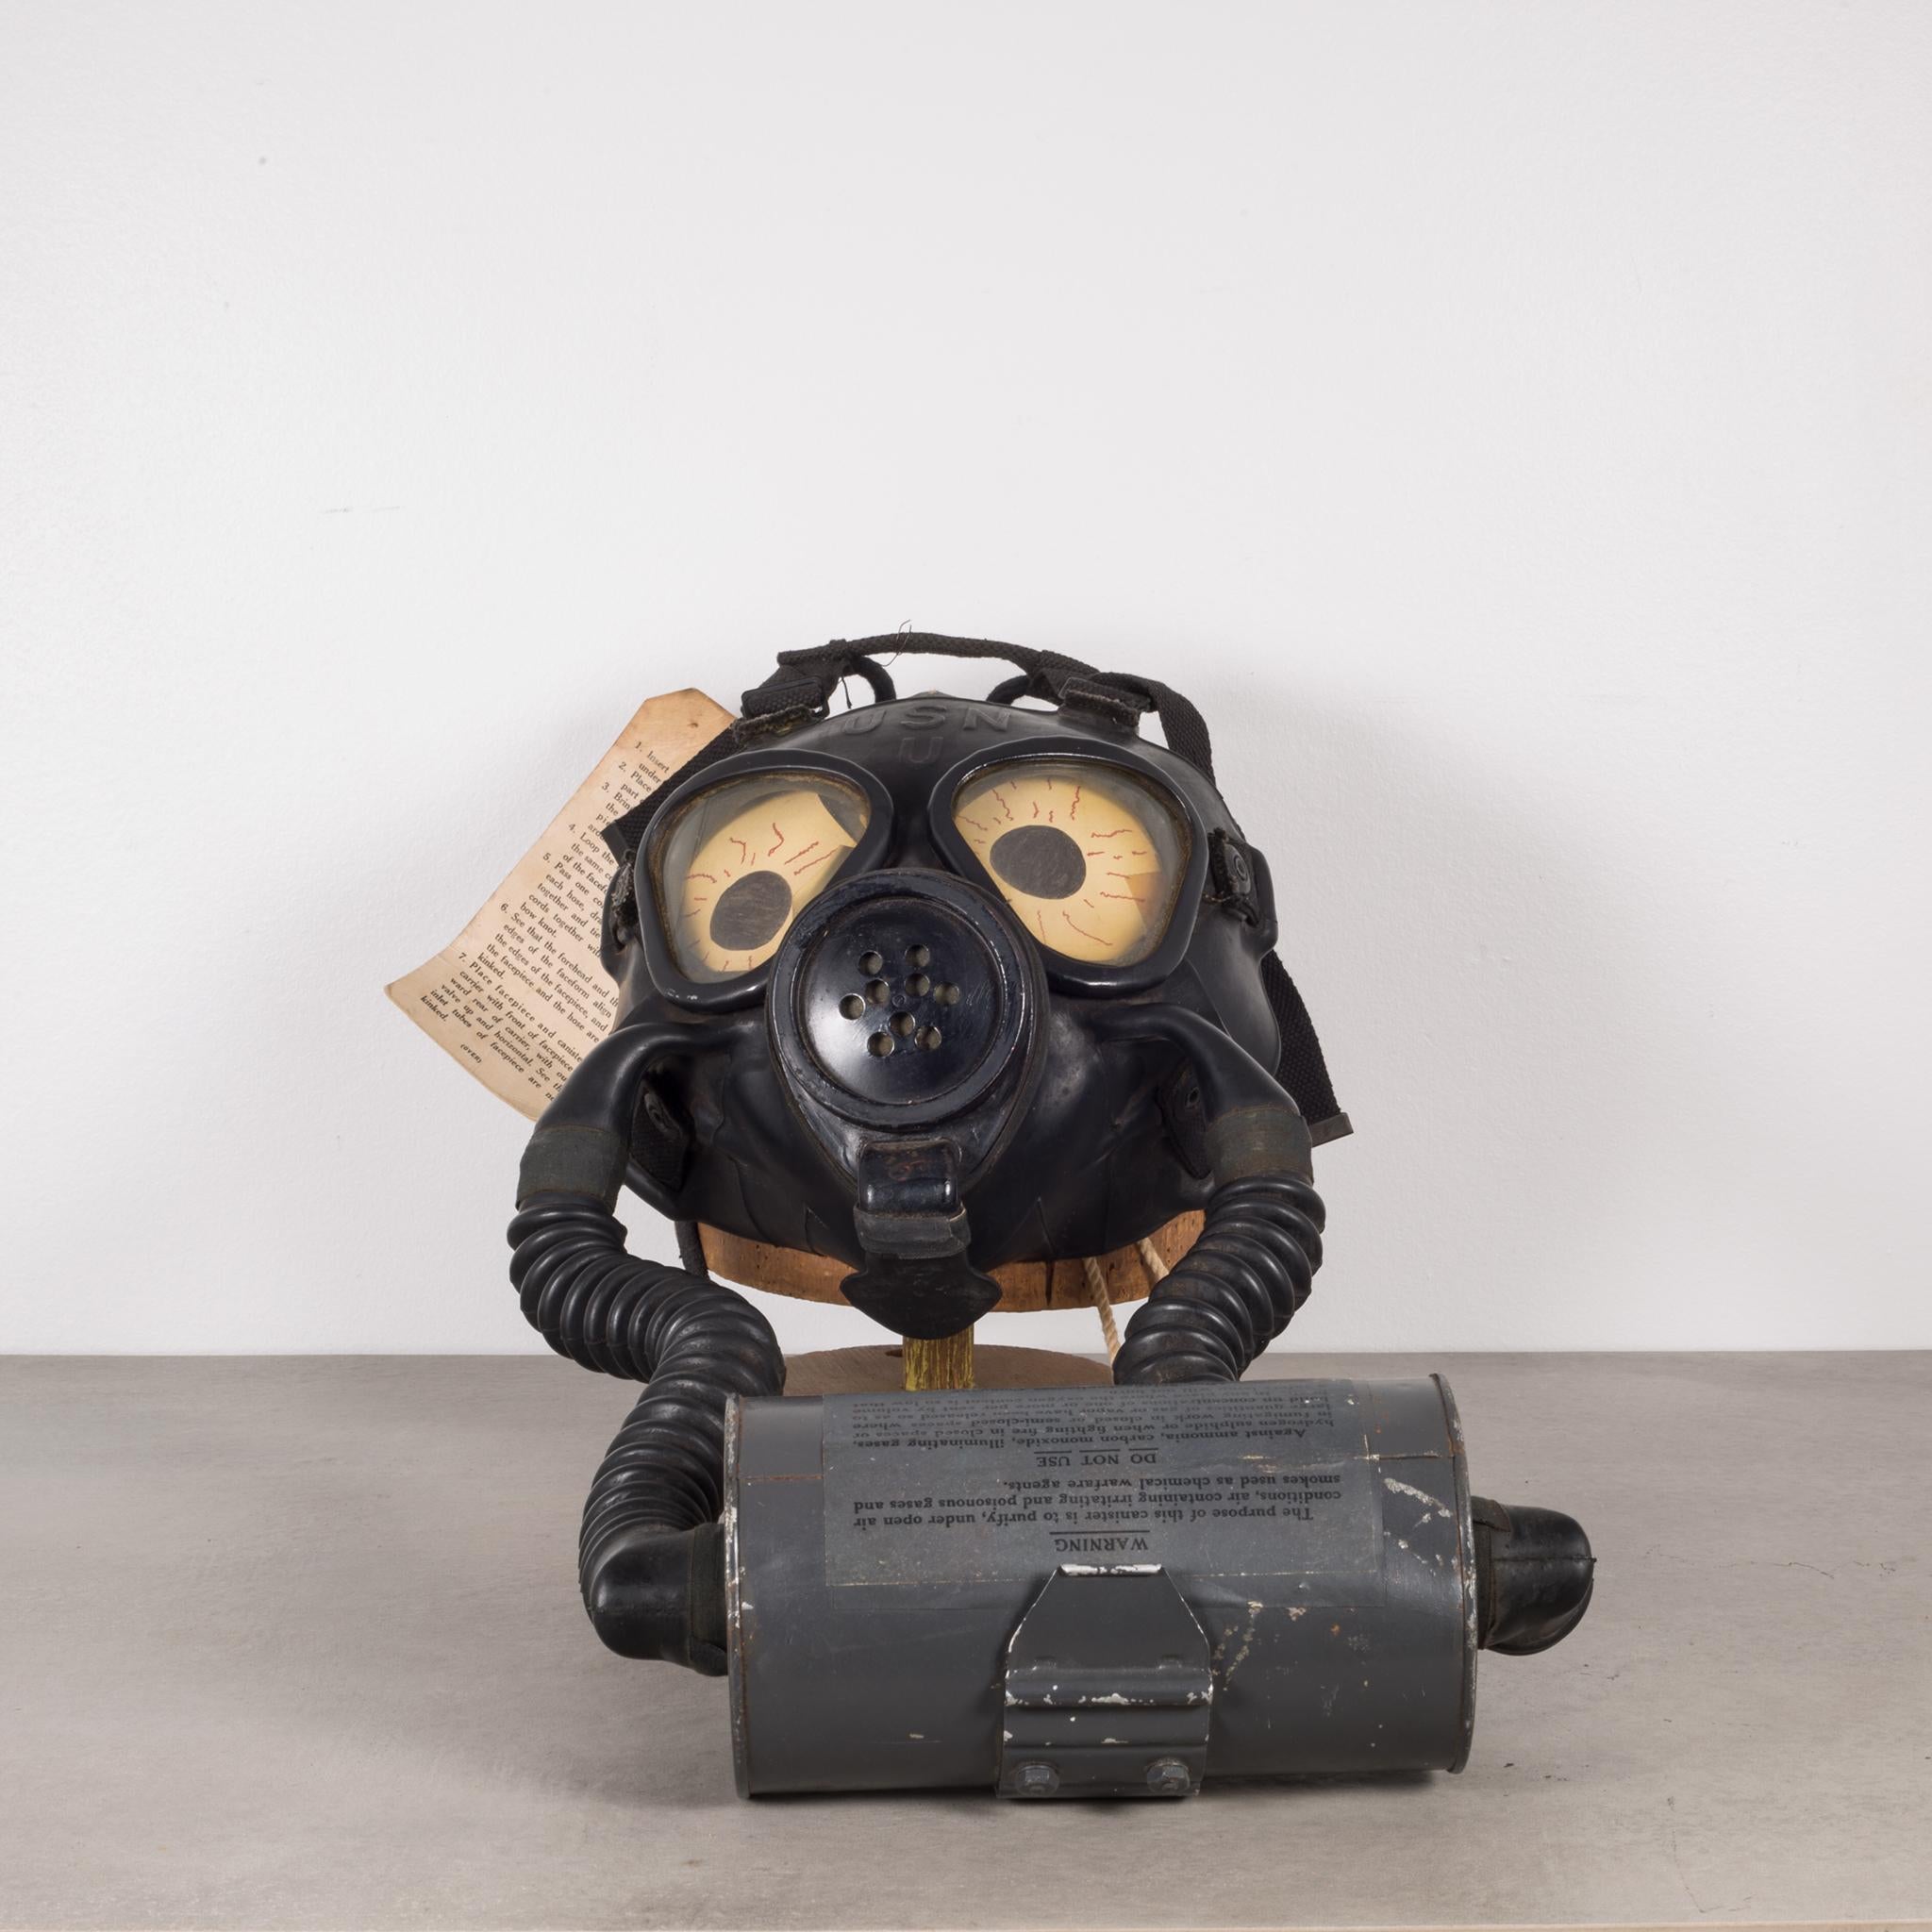 This is an original World War ll era Navy gas mask shop display with original store tag, red eye display, oxygen tank and original fabric carrying bag. The mask has retained its original finish and has the appropriate patina consistent with age and